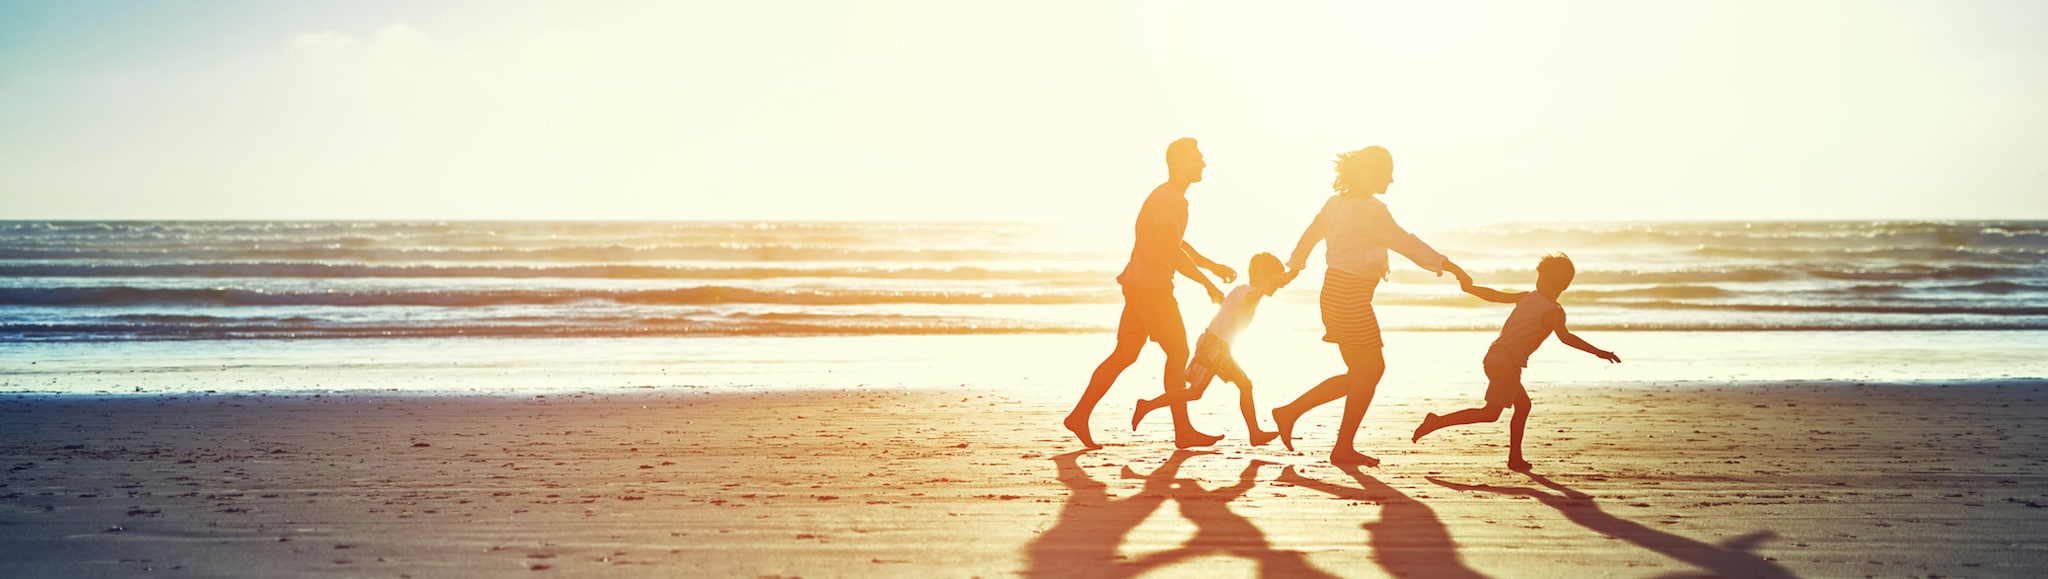 Family walking on beach holding hands, in silhouette from sunset